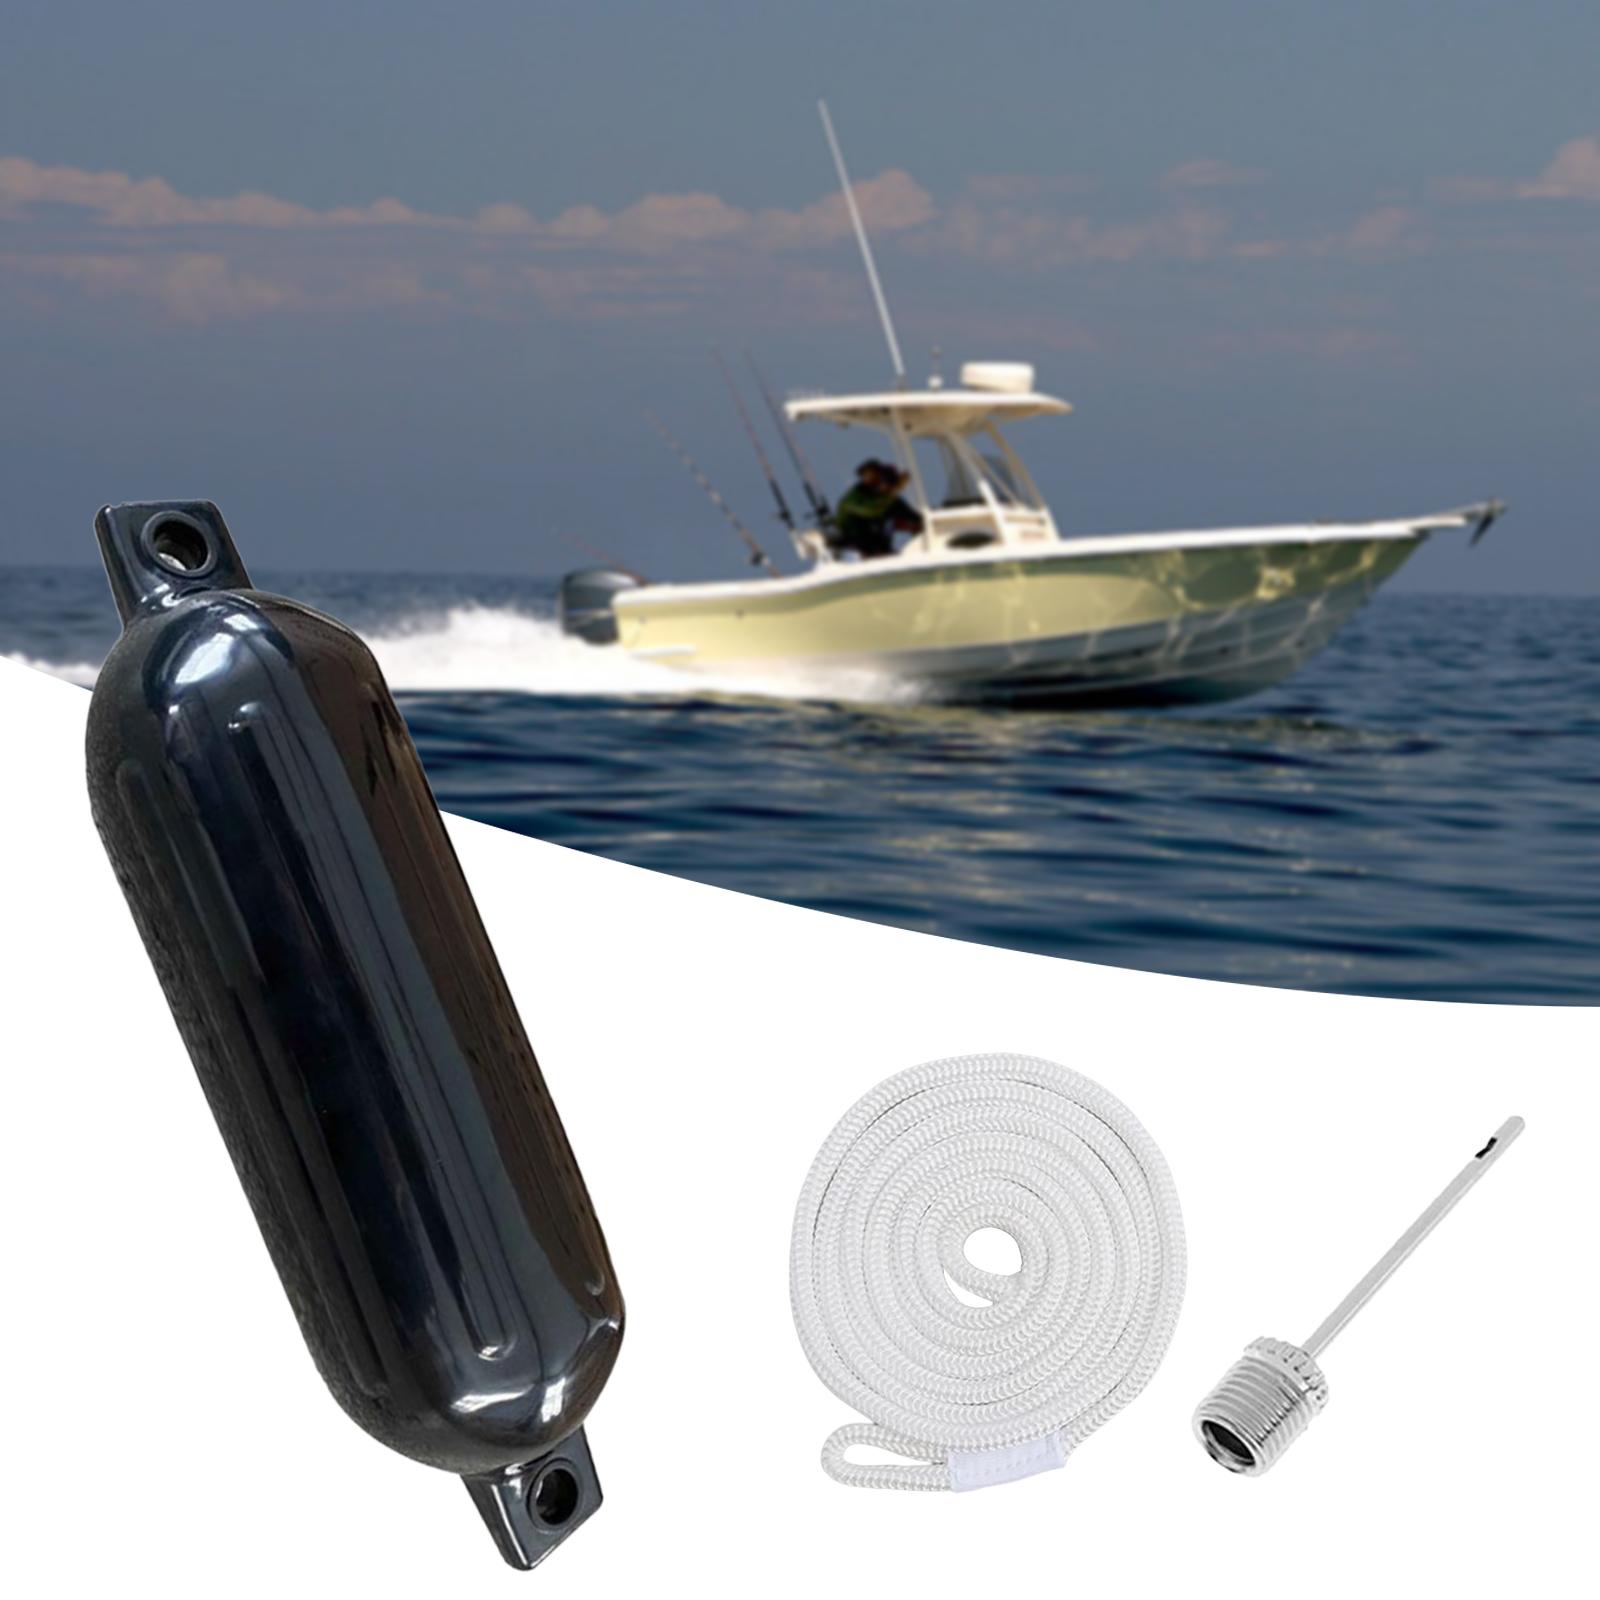 Boat Bumpers Shield Protection with Inflatable Needles Sailboats Marine Dock Black White Rope